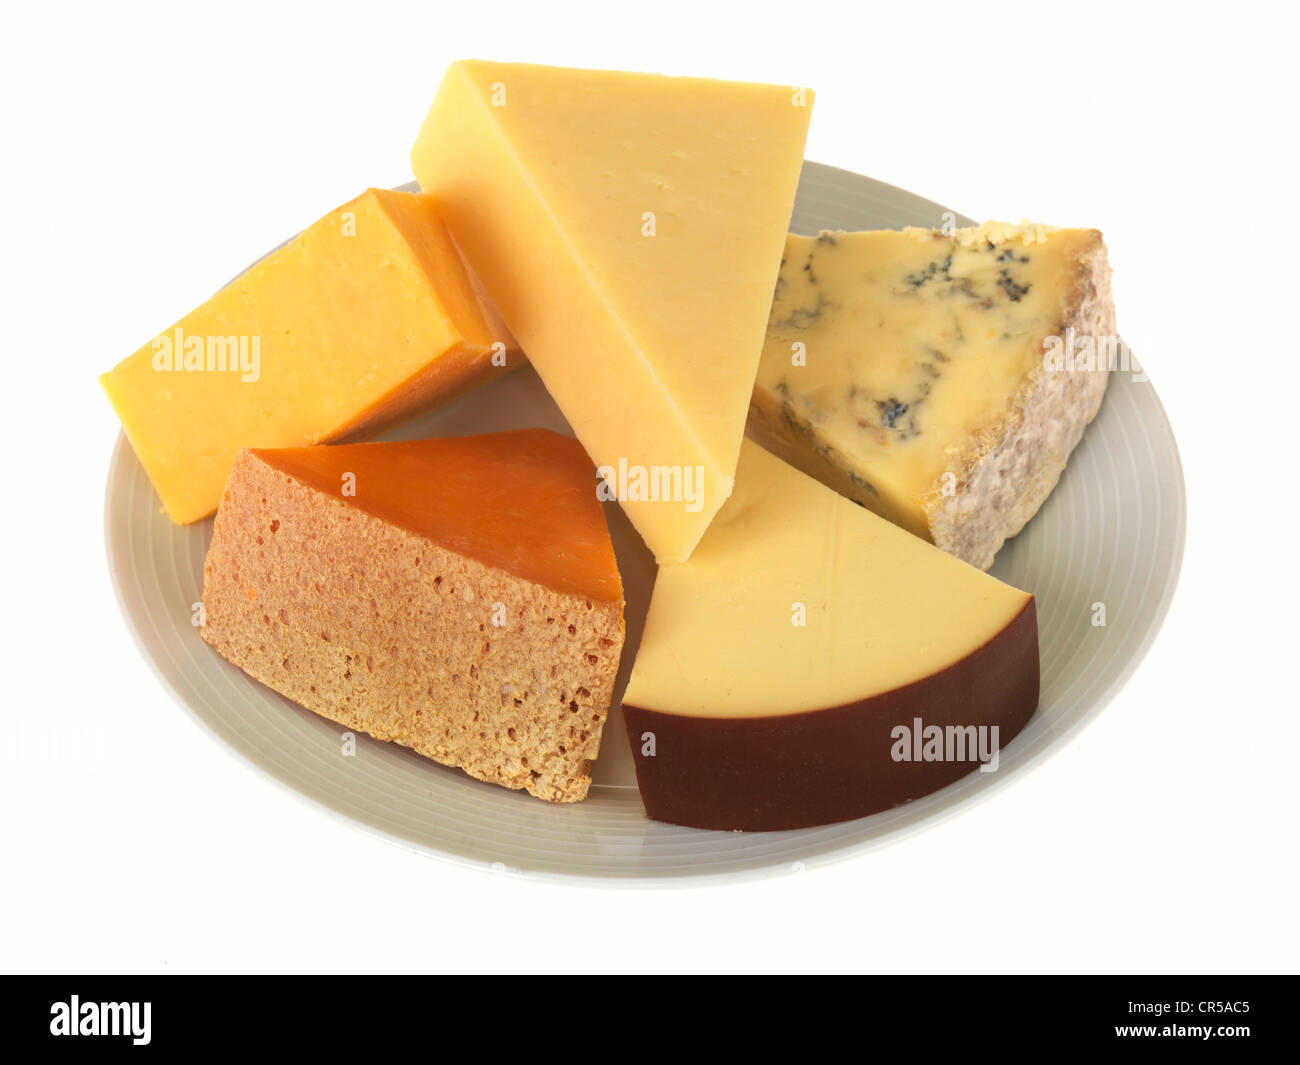 Plate Of Fresh Mixed Dessert Cheeses Ready To Eat Isolated Against A White Background With No People Stock Photo